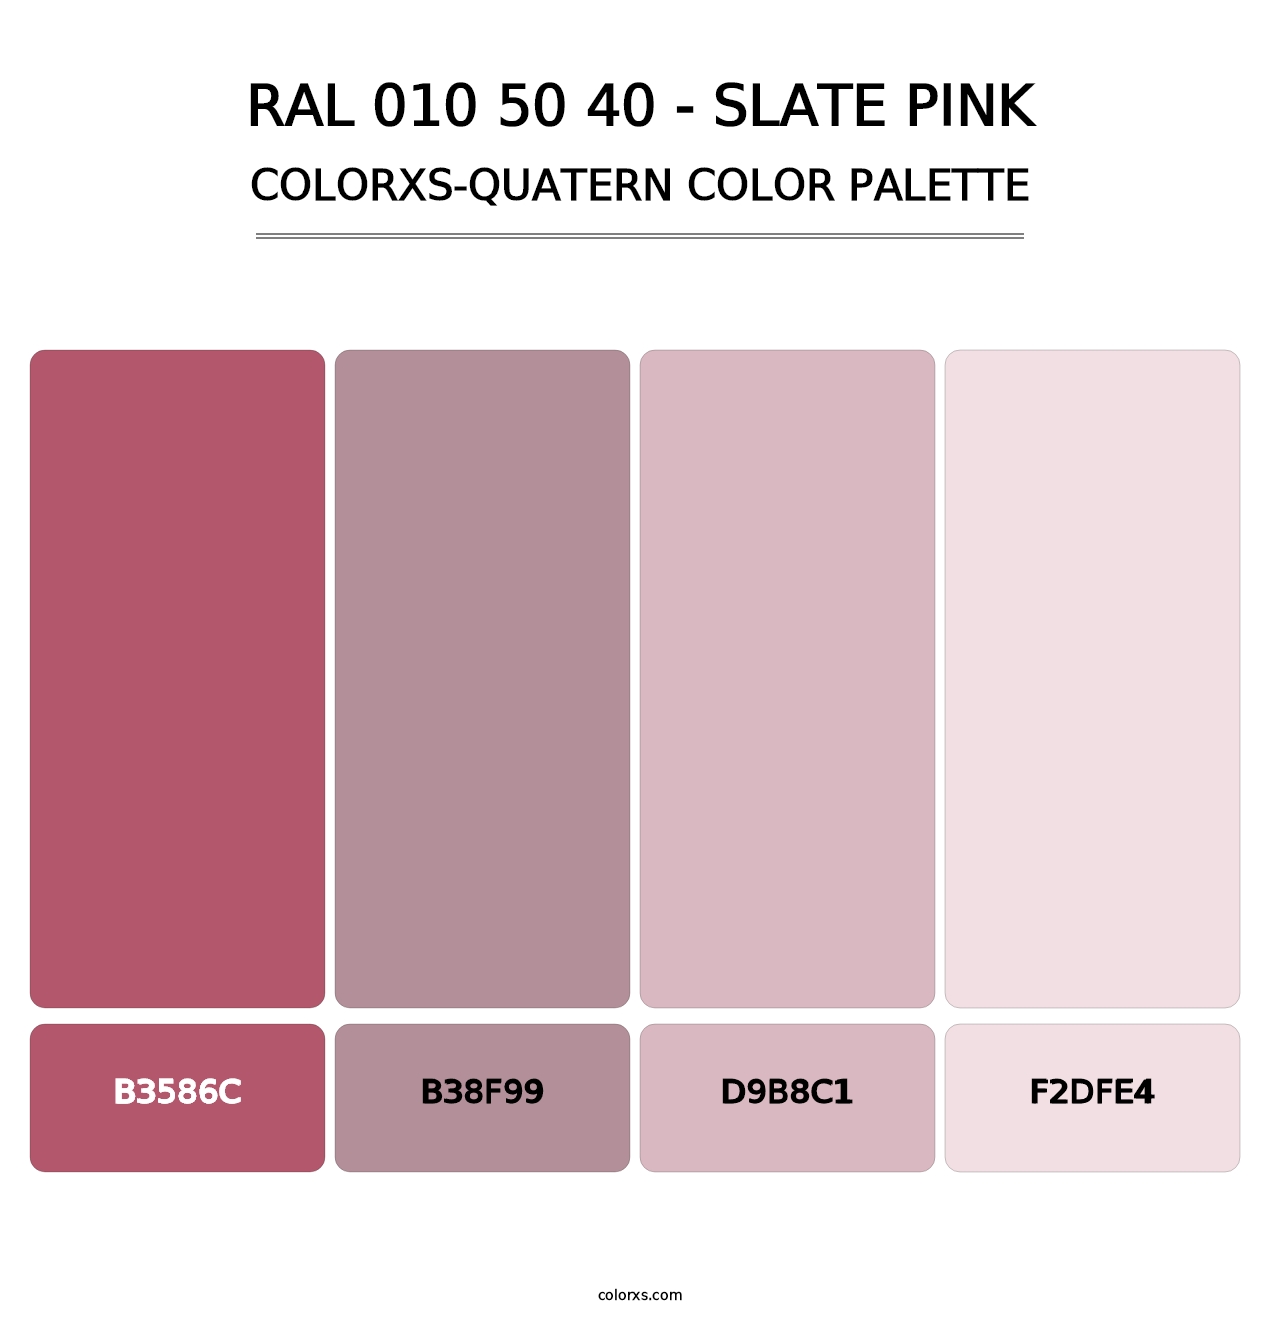 RAL 010 50 40 - Slate Pink - Colorxs Quatern Palette